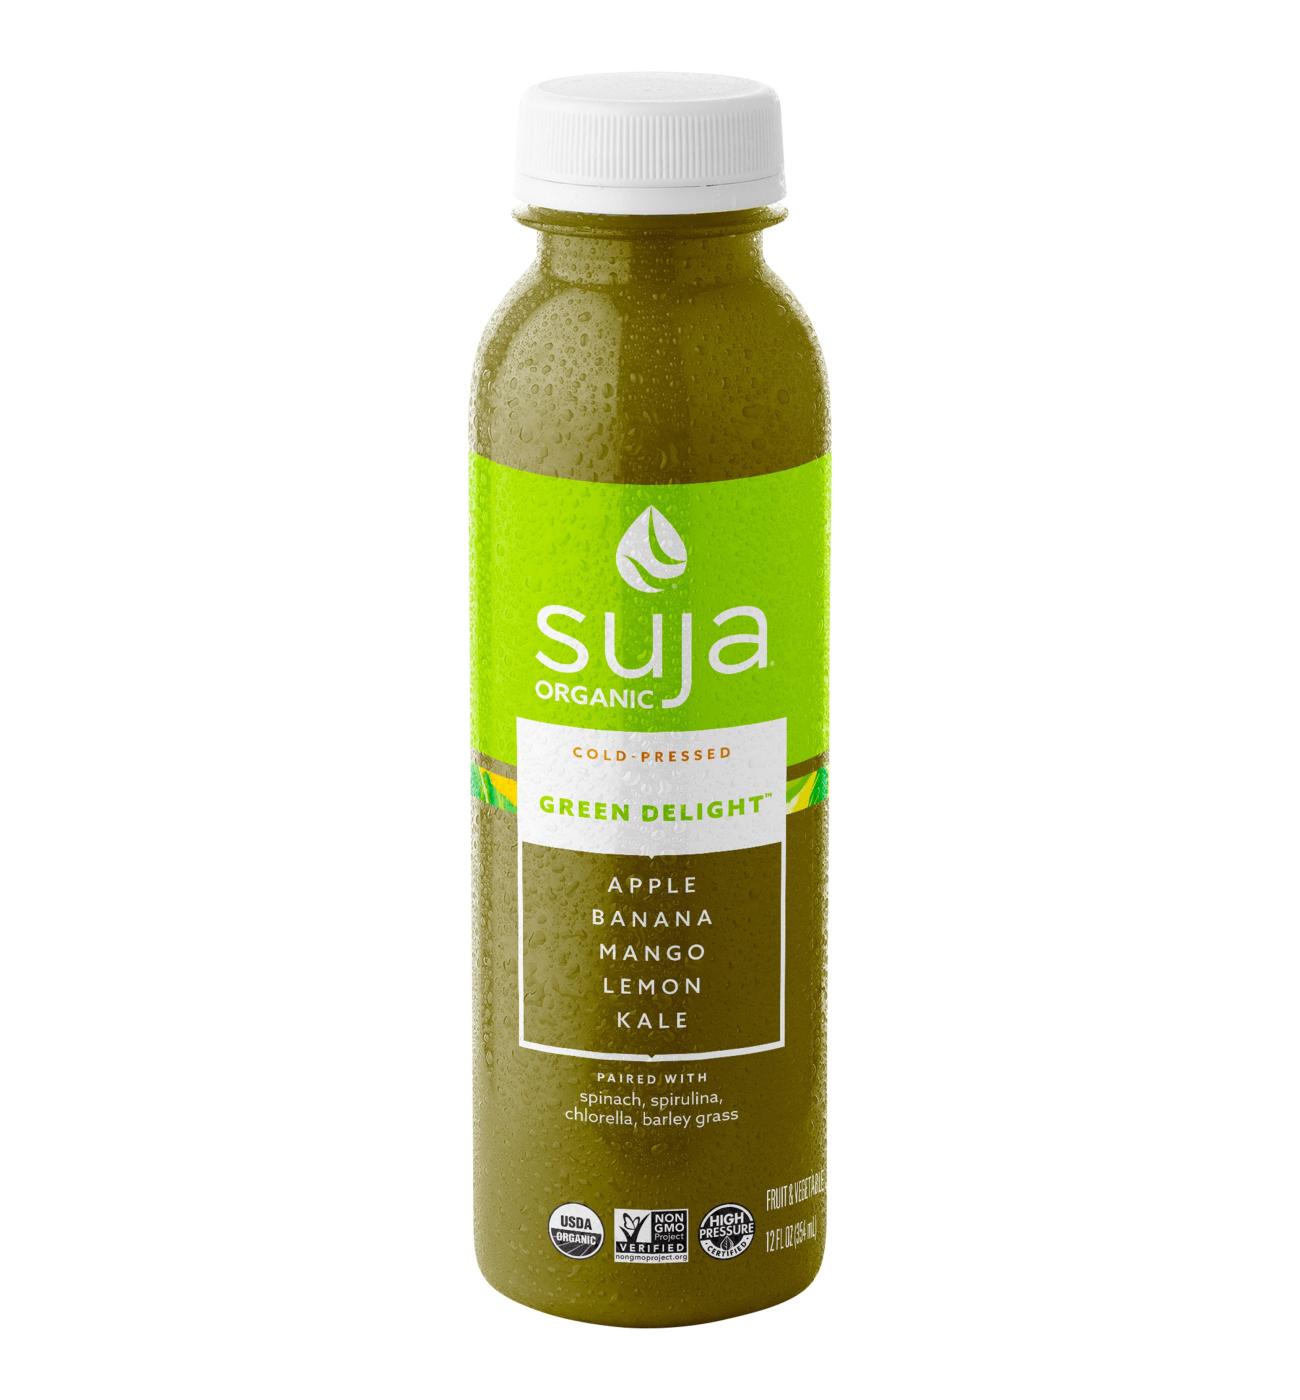 Suja Organic Green Delight Cold-Pressed Juice; image 1 of 2